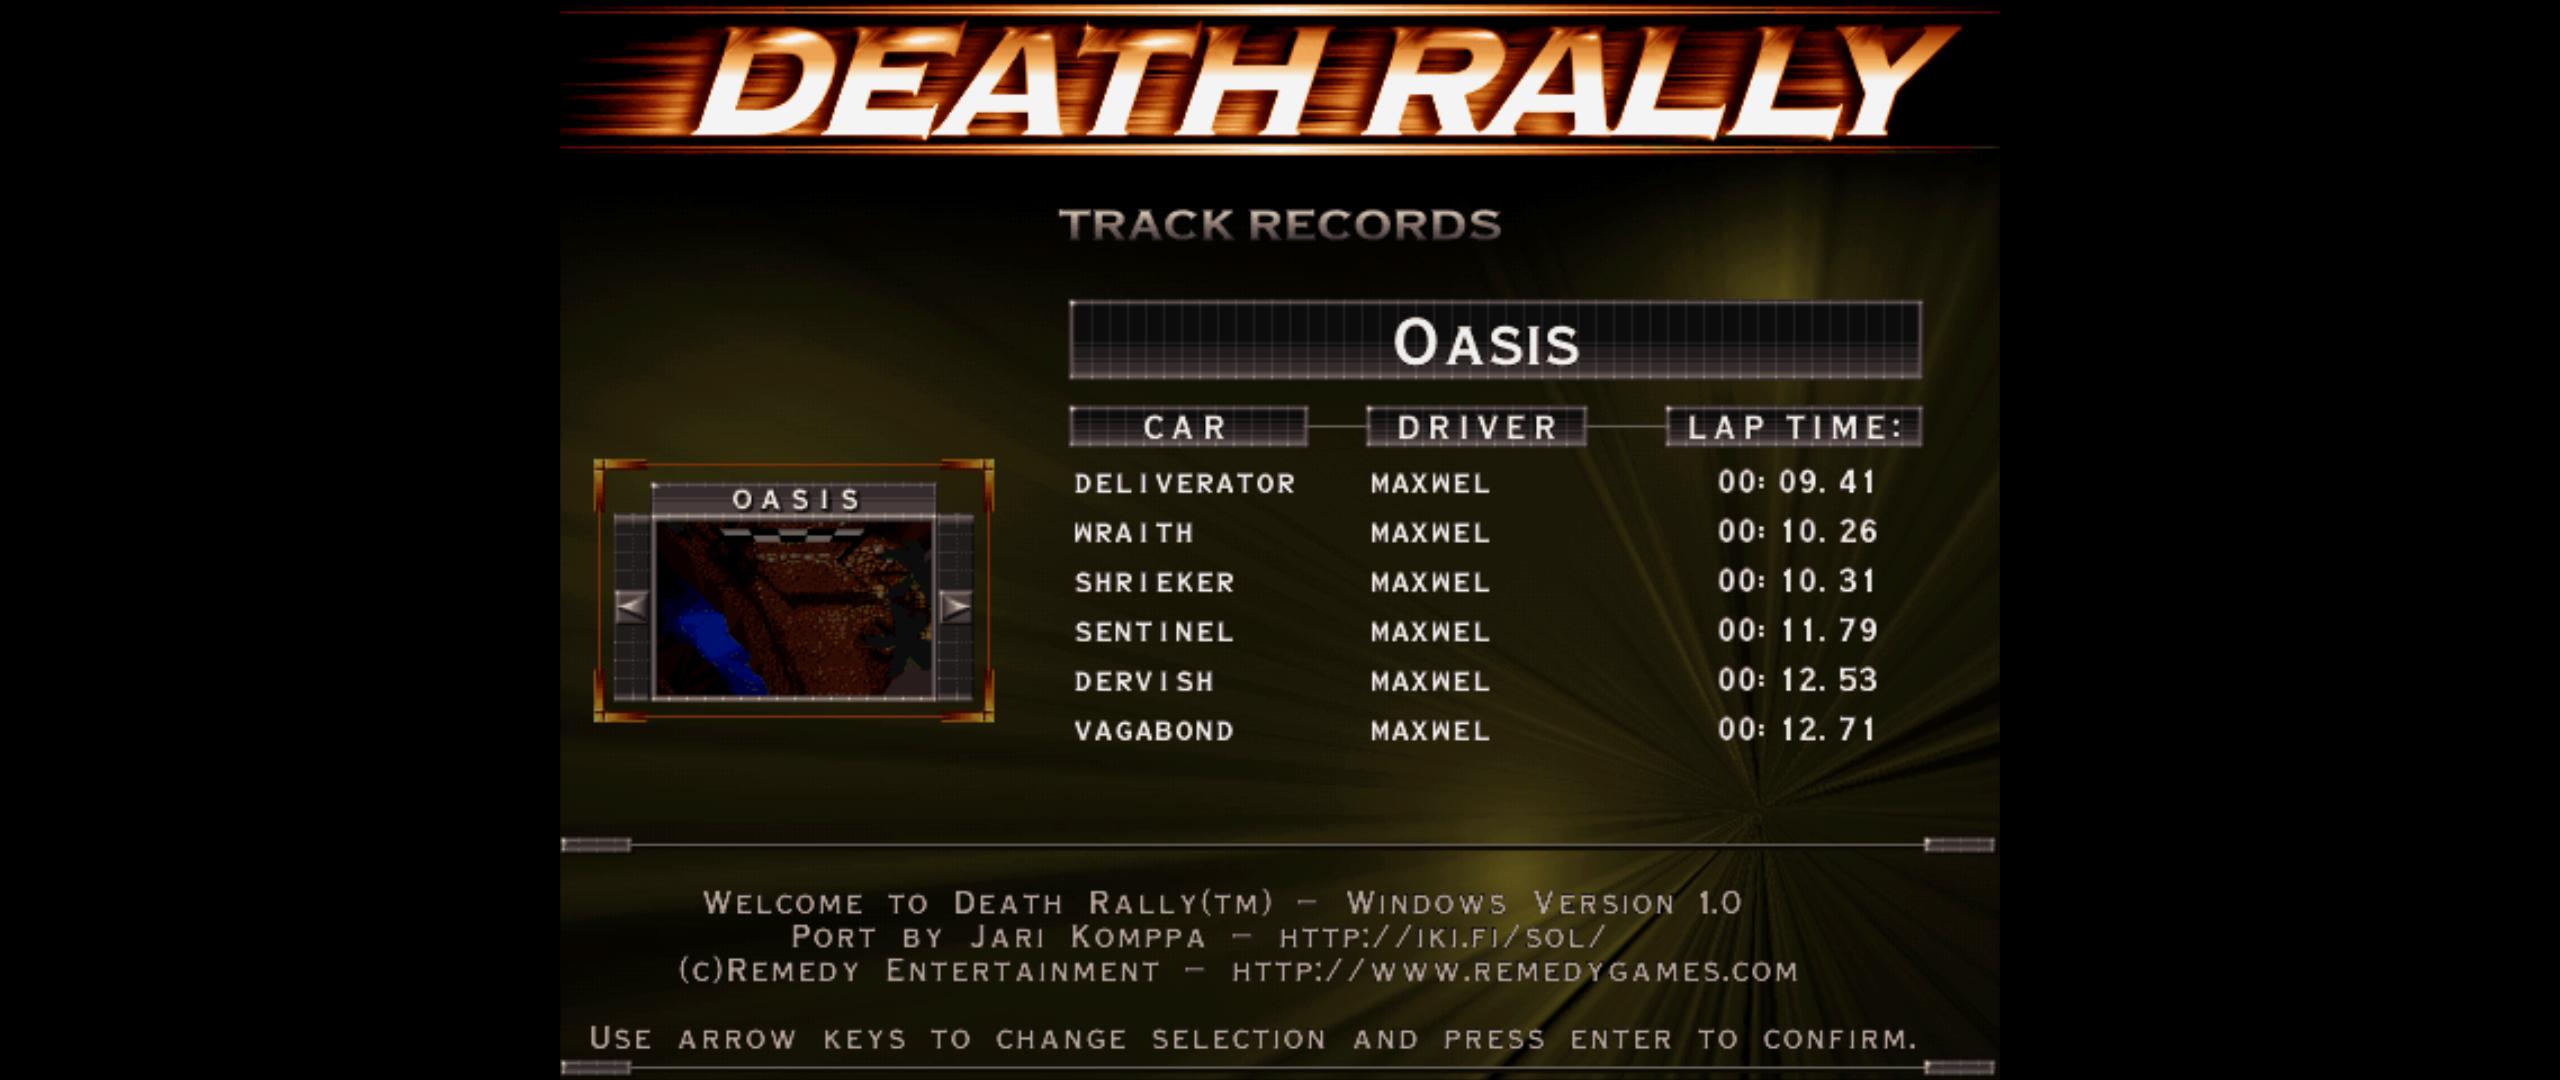 Maxwel: Death Rally [Oasis, Deliverator Car] (PC) 0:00:09.41 points on 2016-03-02 05:43:01